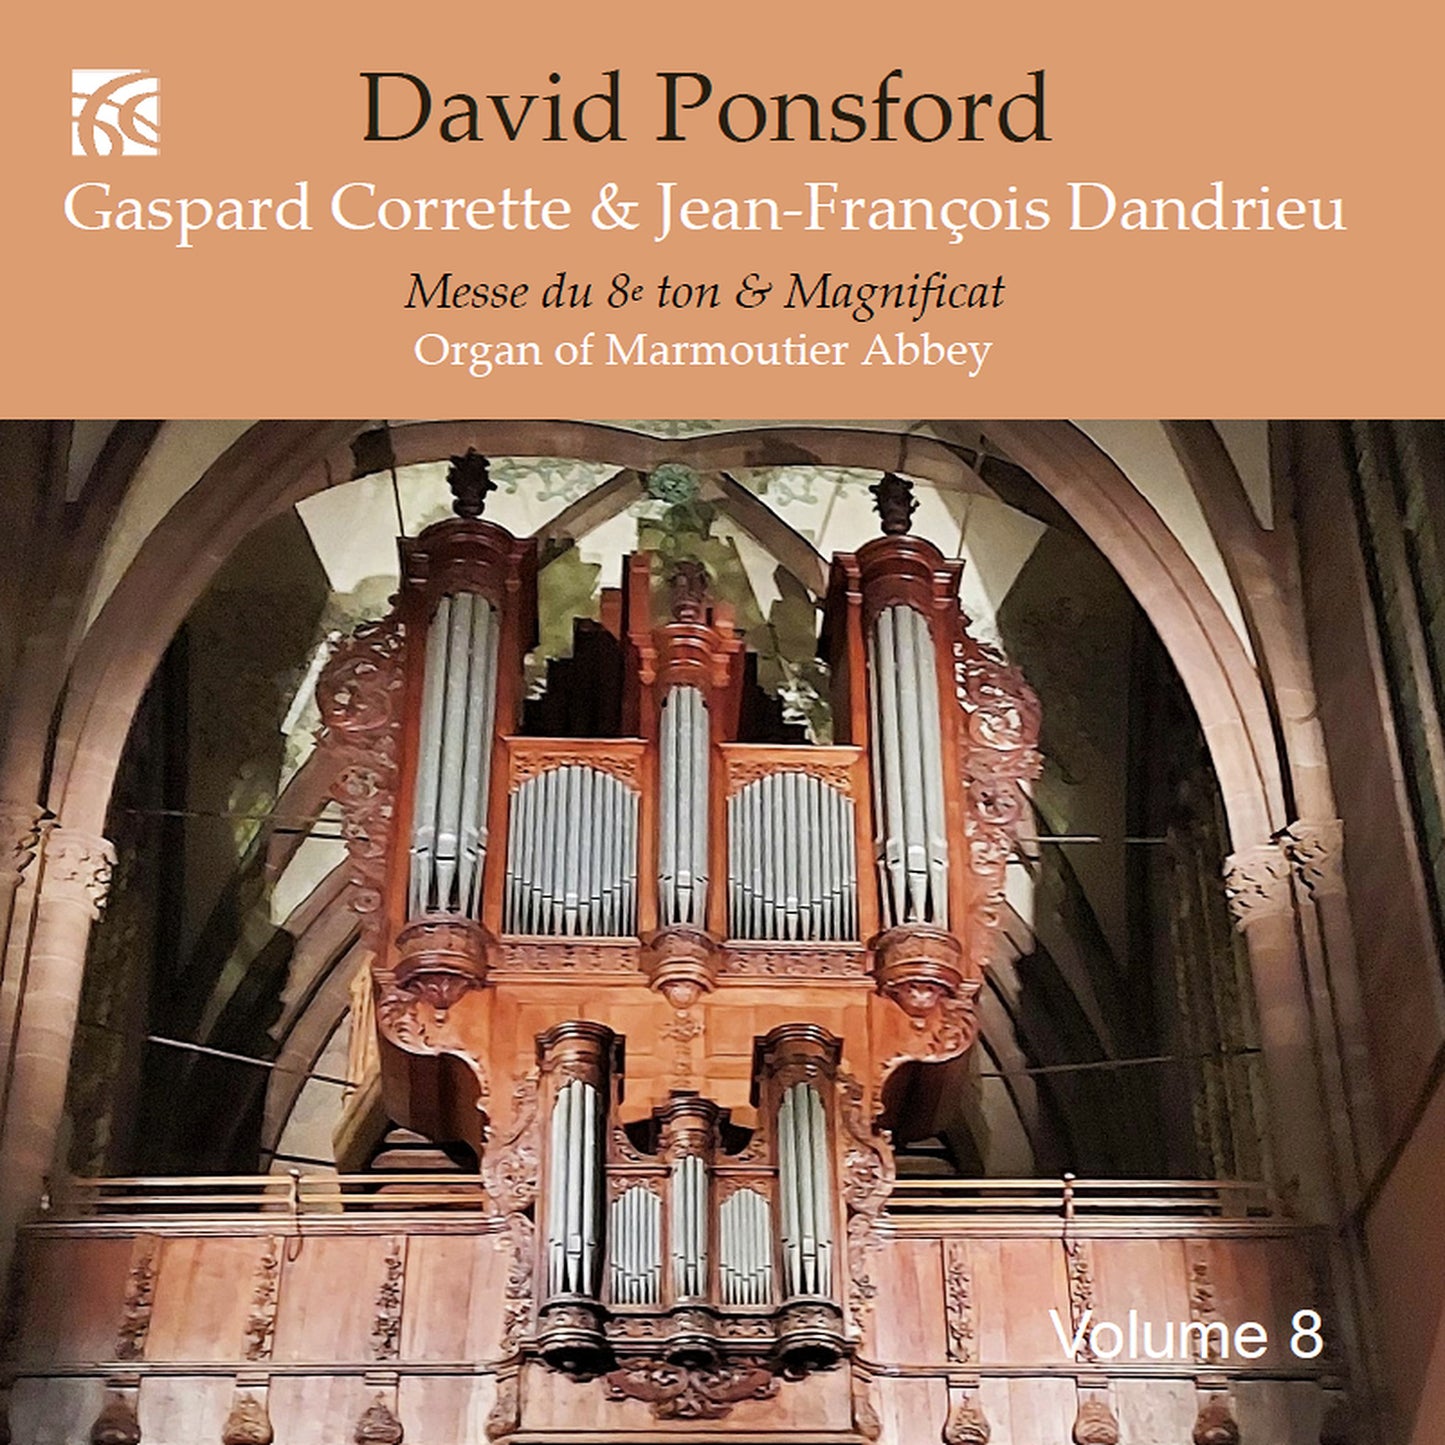 Corrette & Dandrieu: French Organ Music From The Golden Age,